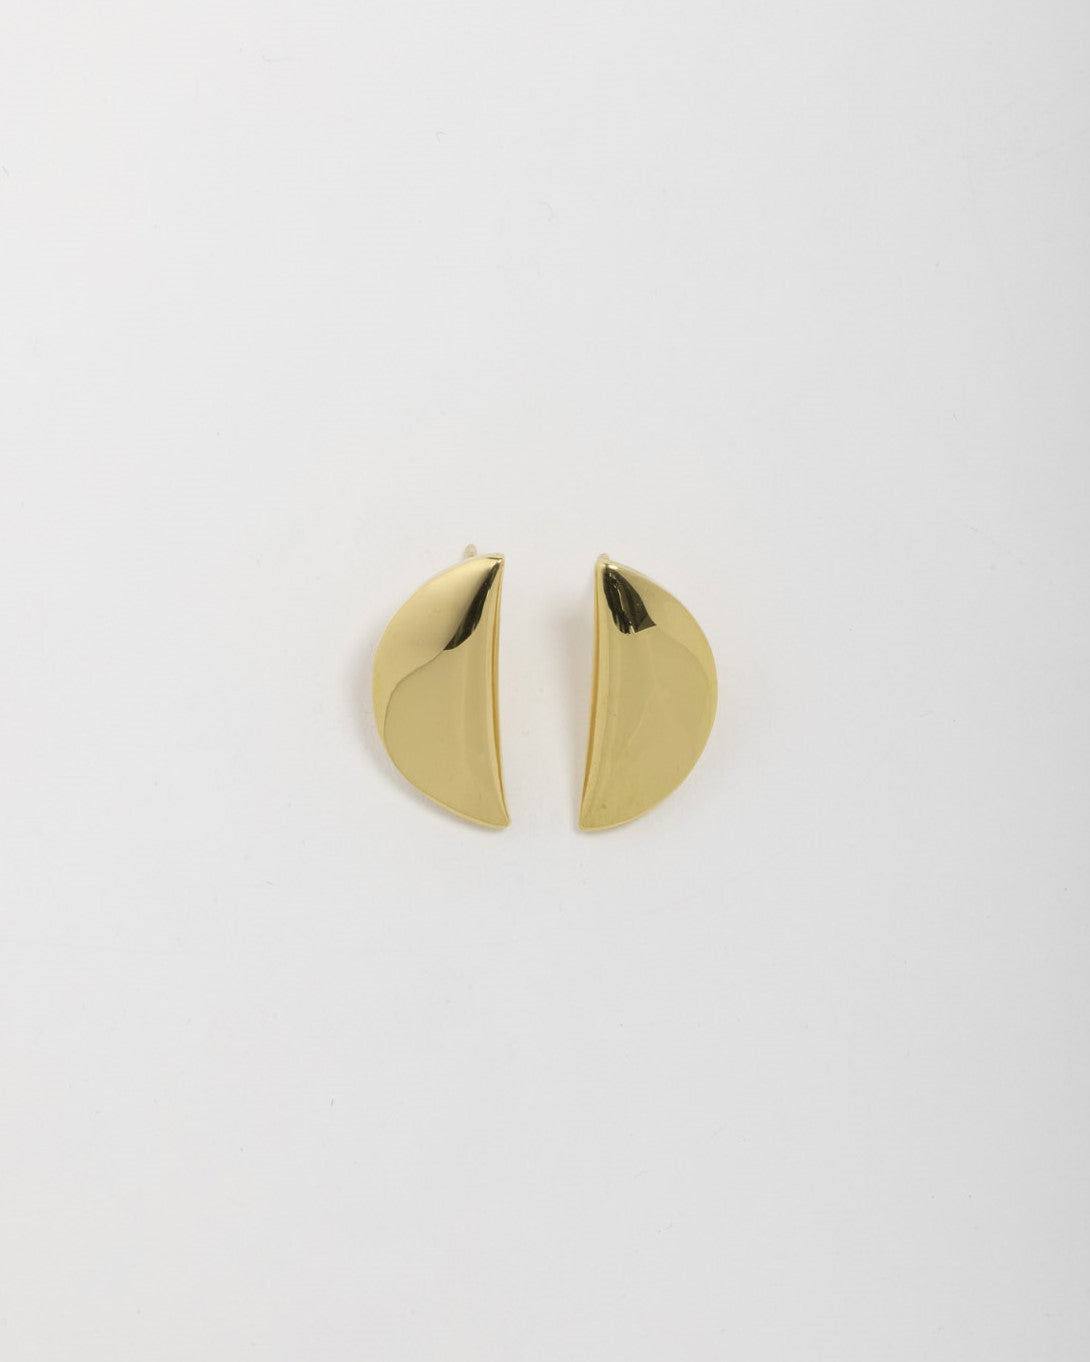 Mussels Small Gold Earrings